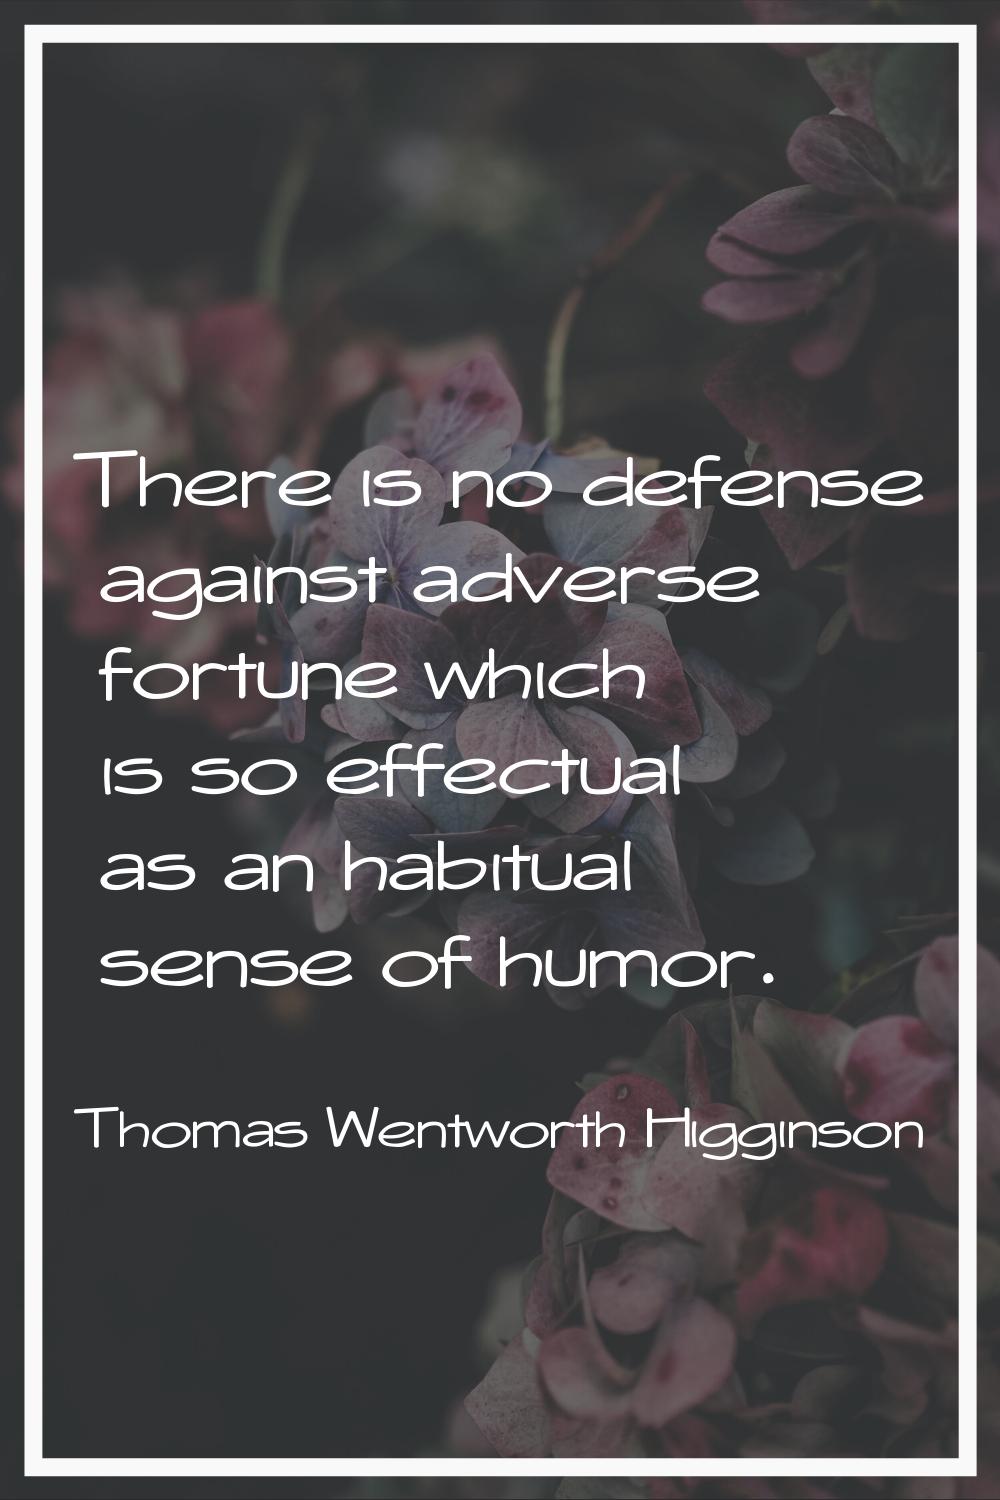 There is no defense against adverse fortune which is so effectual as an habitual sense of humor.